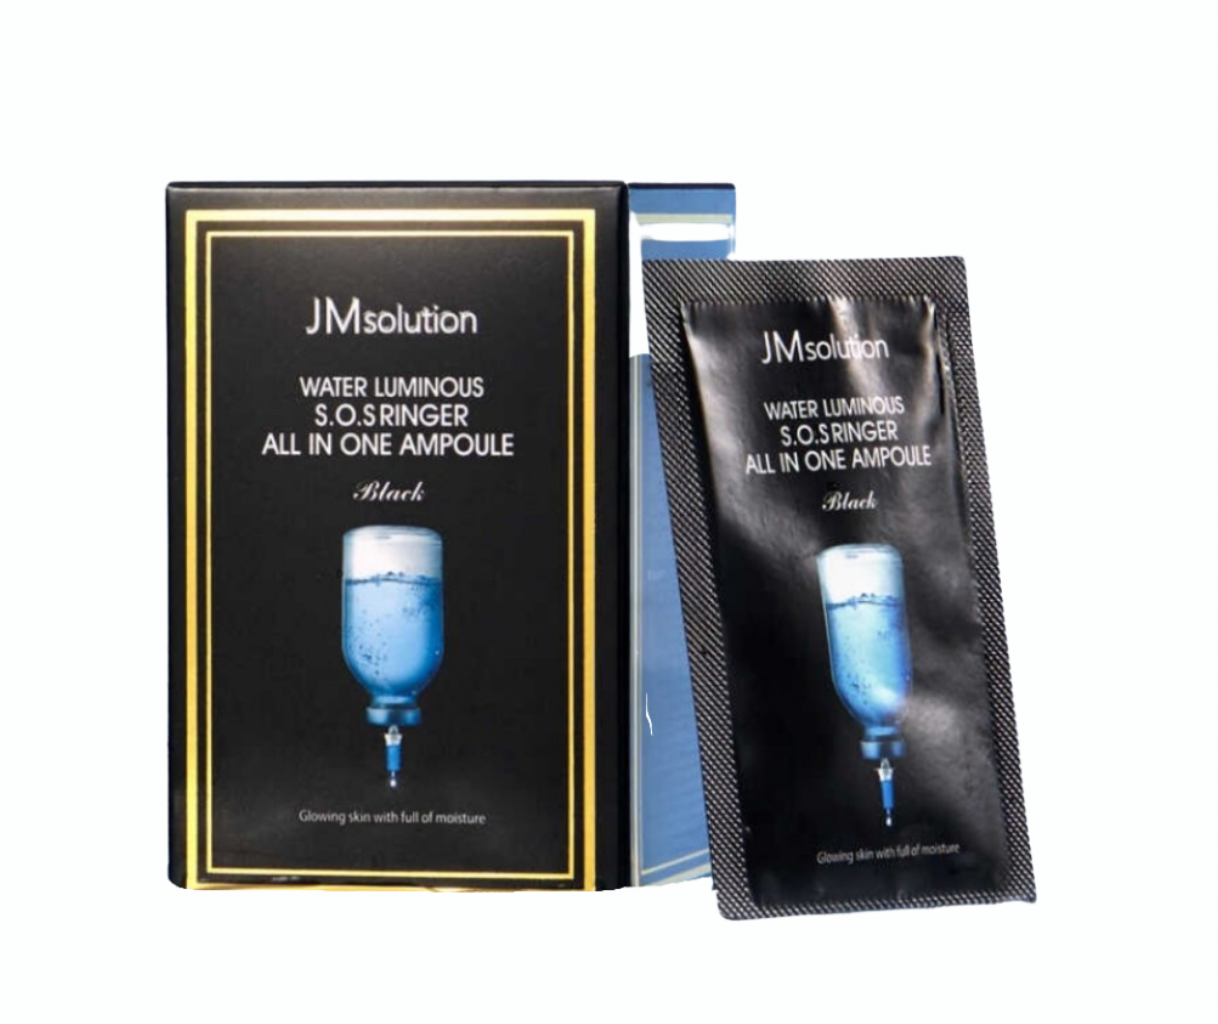 JMSOLUTION WATER LUMINOUS S.O.S RINGER ALL IN ONE AMPOULE black 2ml * 30 pices